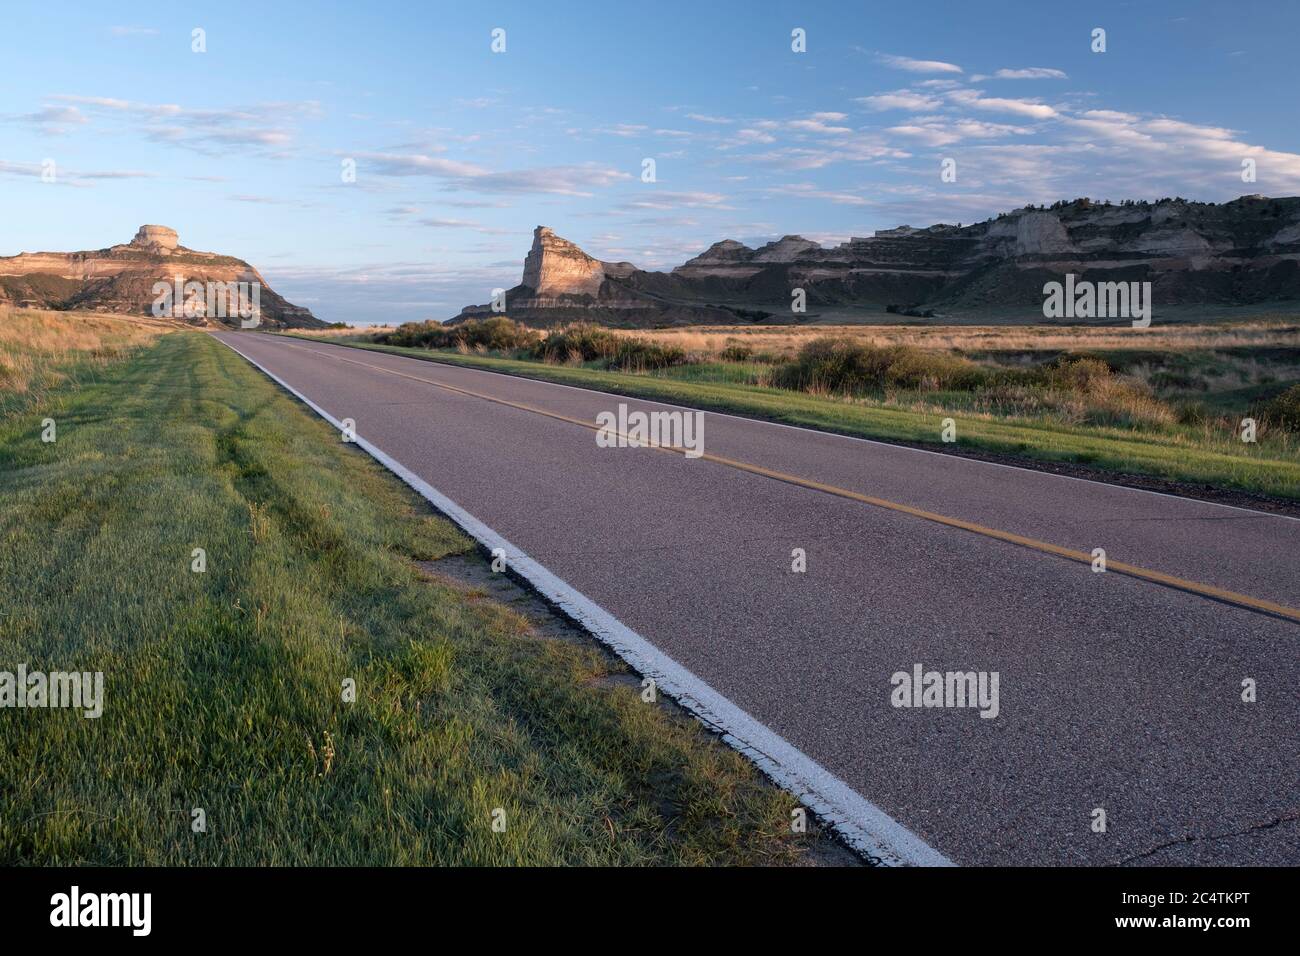 Looking along the Old Oregon Trail road in the center of Scotts Bluff National Monument, Nebraska Stock Photo